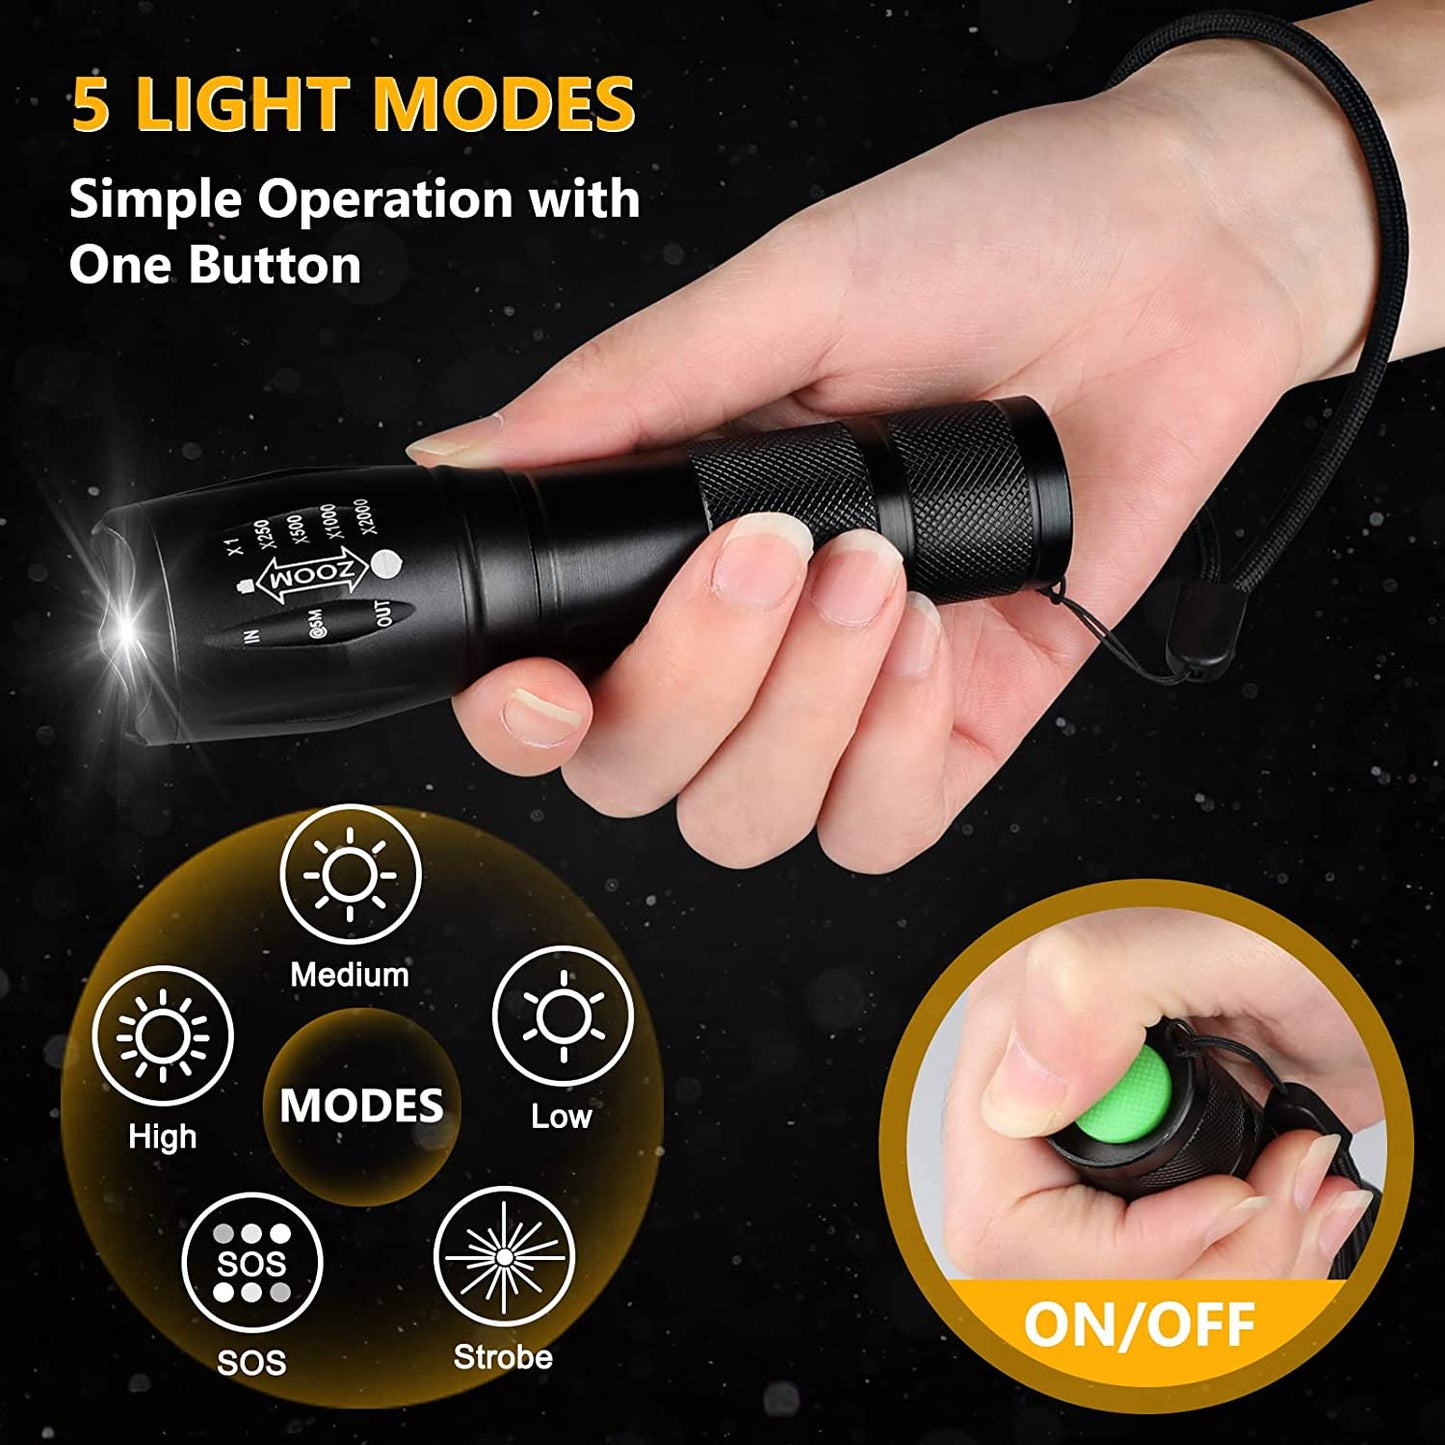 LED Torch 1 Pack, 2000LM LED Flashlight Adjustable, 5 Modes Focus , Waterproof Powerful Pocket Torch for Camping, Hiking, Walking, Outdoor, Emergency Wintory